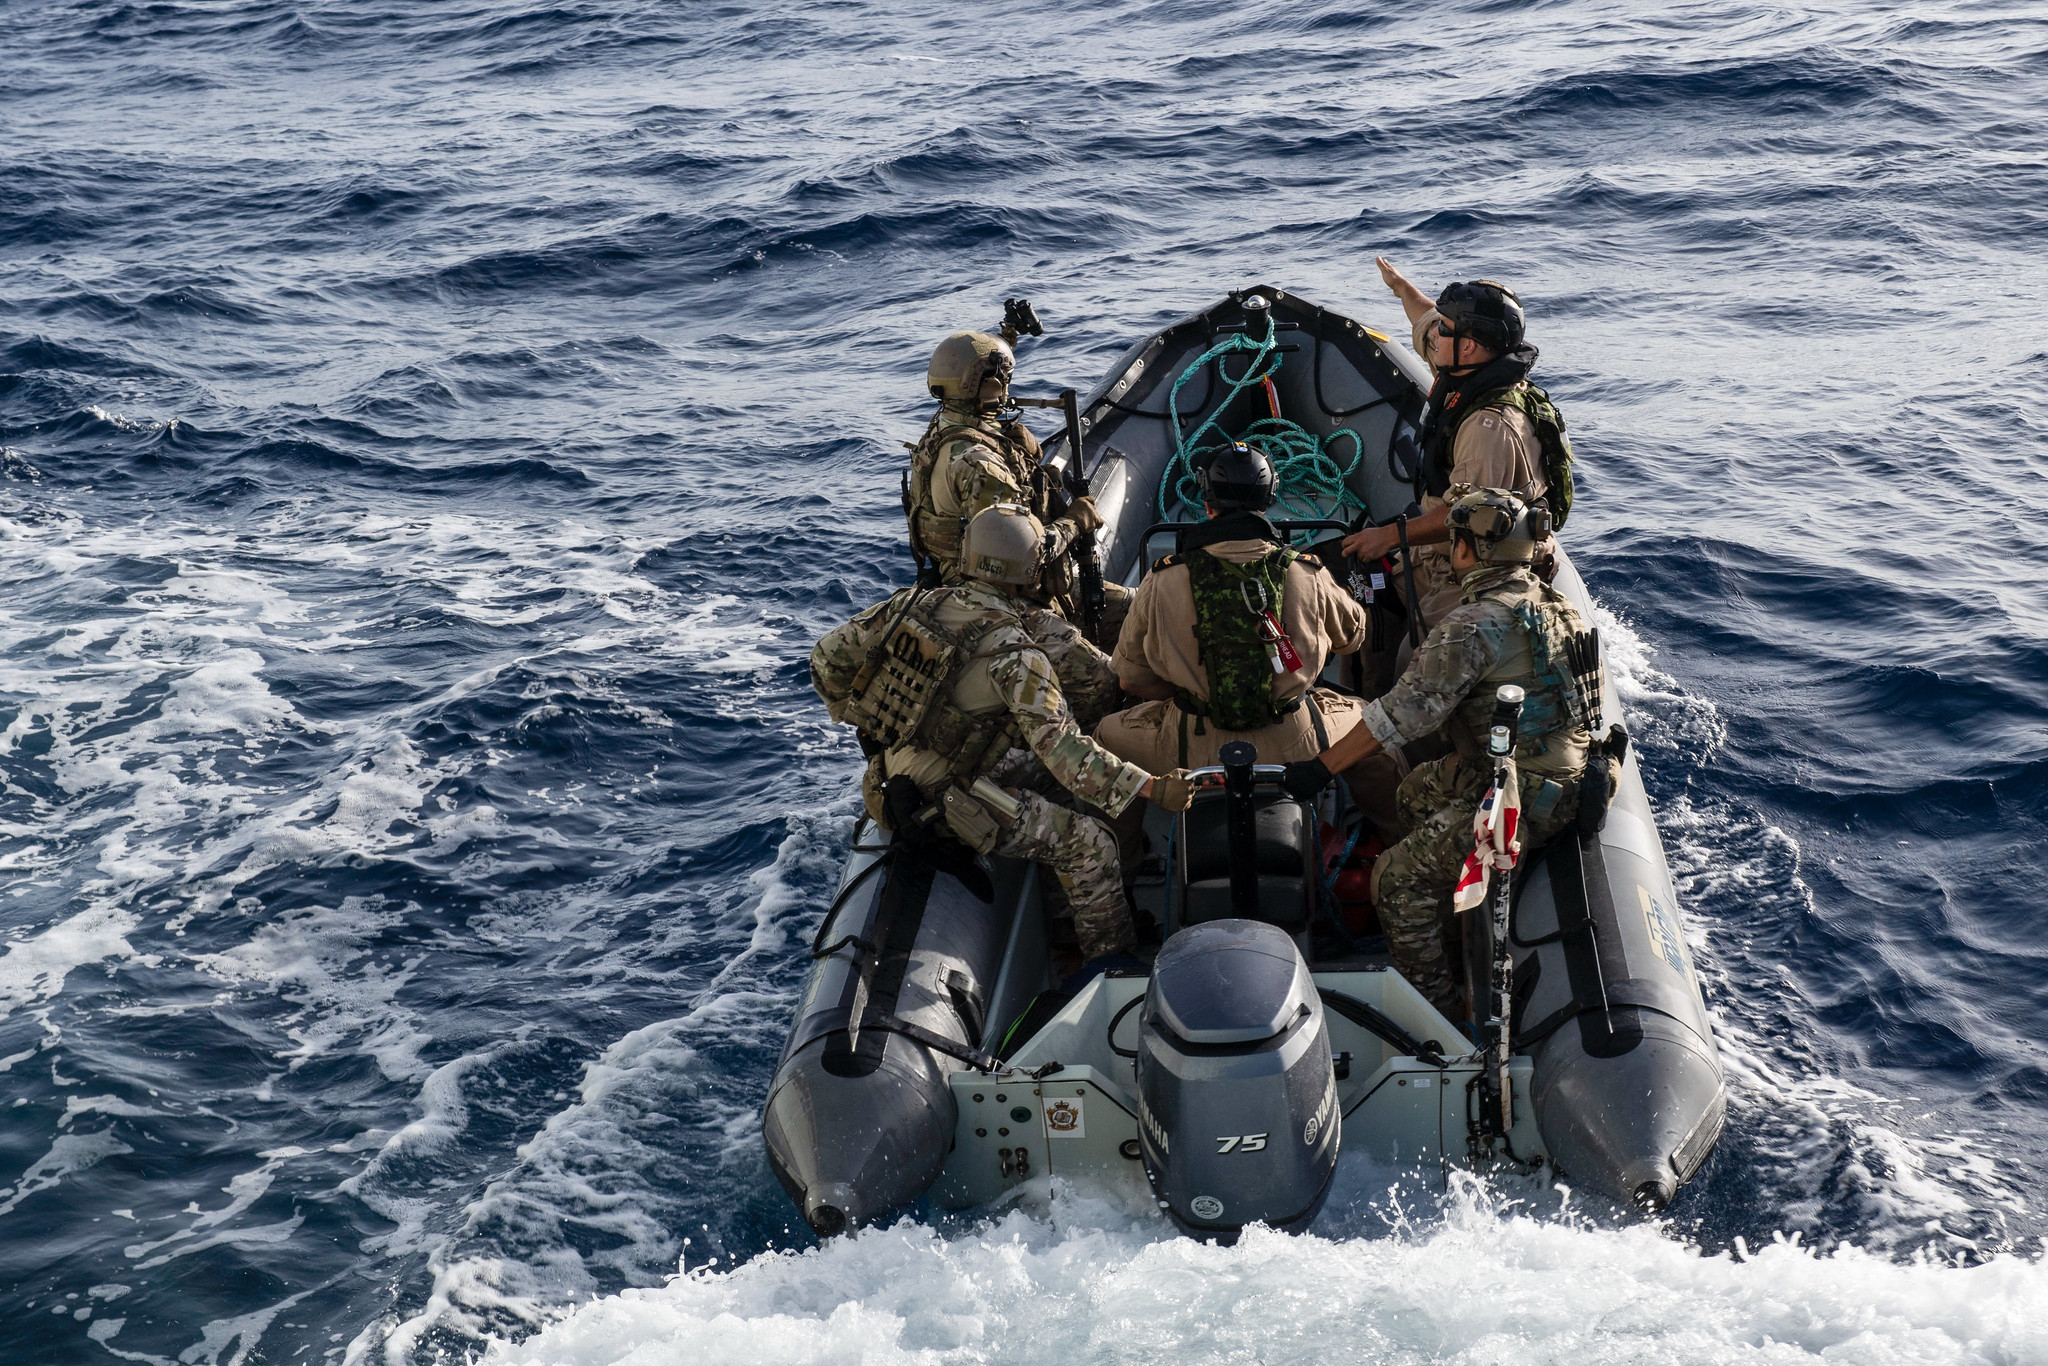 Sailors and U.S. Coast Guard LEDET members aboard HMCS Shawinigan deploy on the RHIB to encounter a vessel of interest suspected of carrying illegal contraband during Operation Caribbe on July 21.